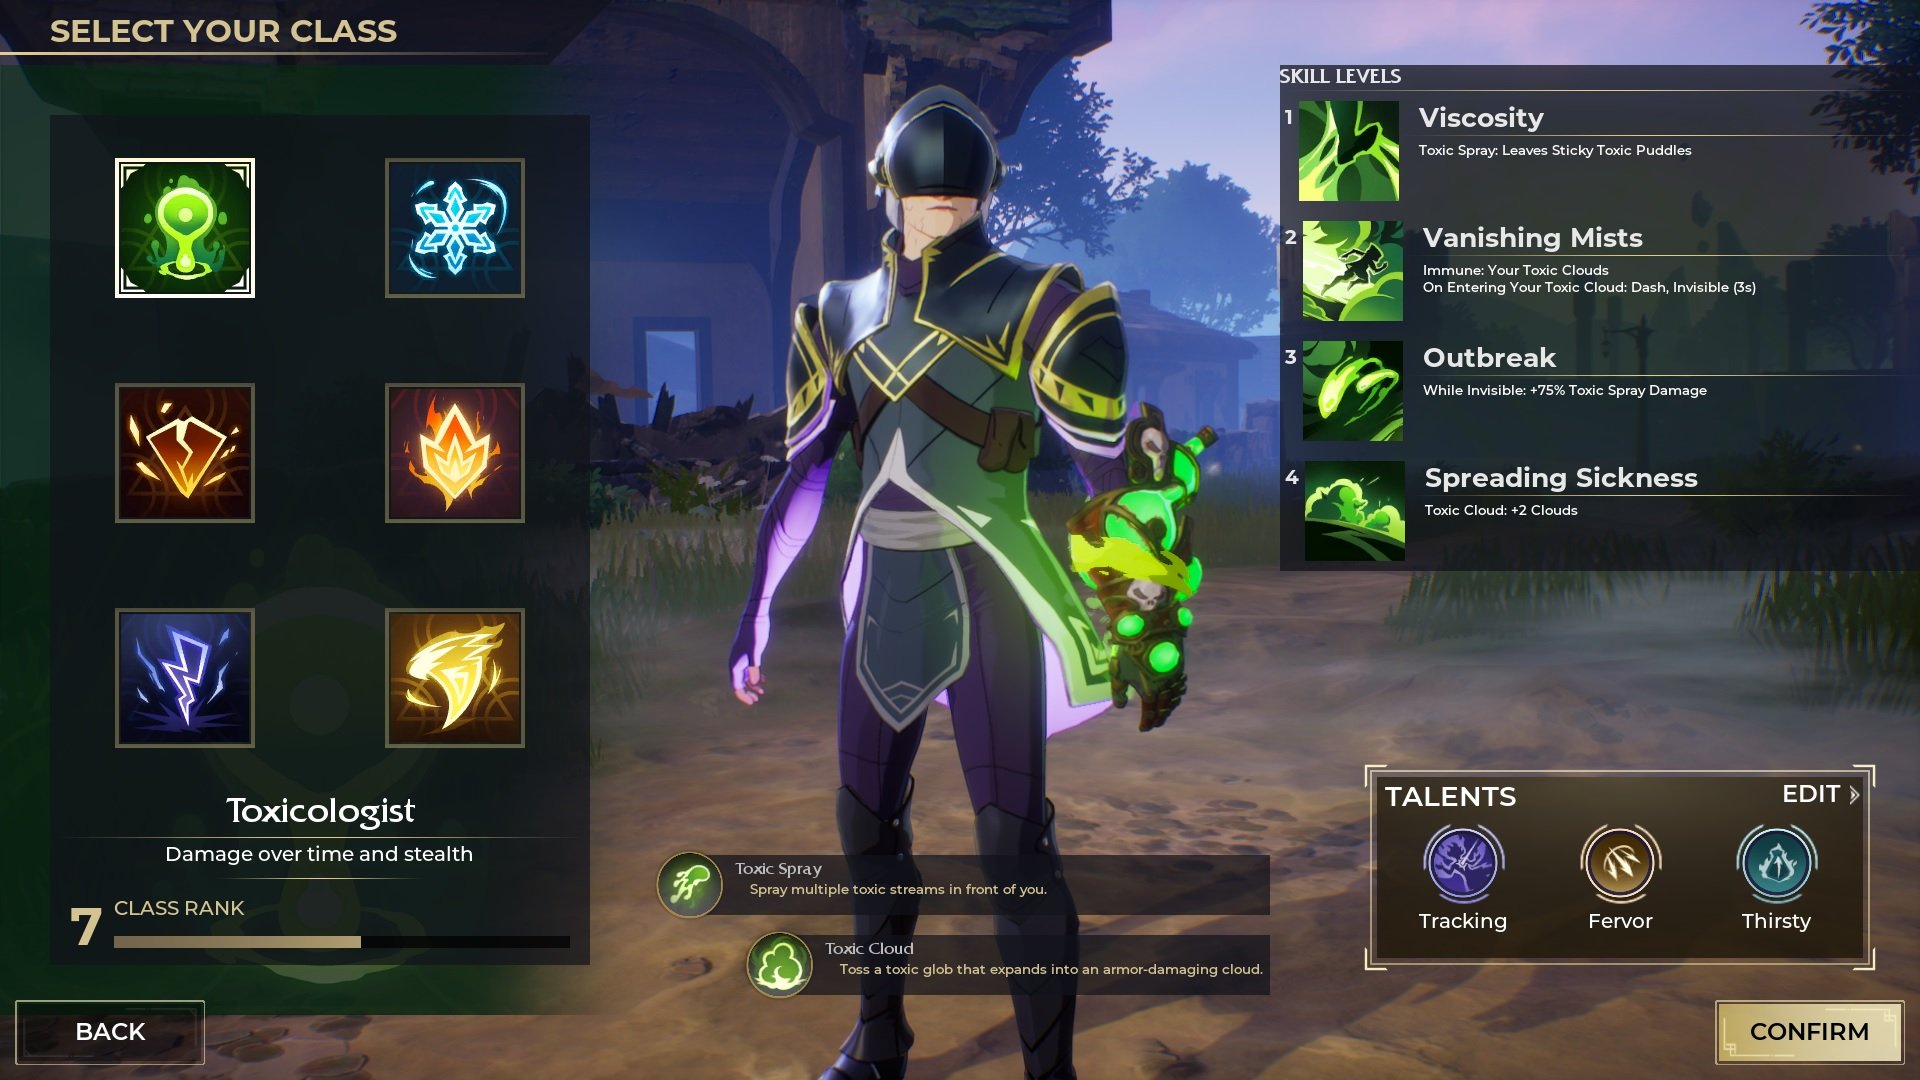  How to play the Toxicologist class in Spellbreak 